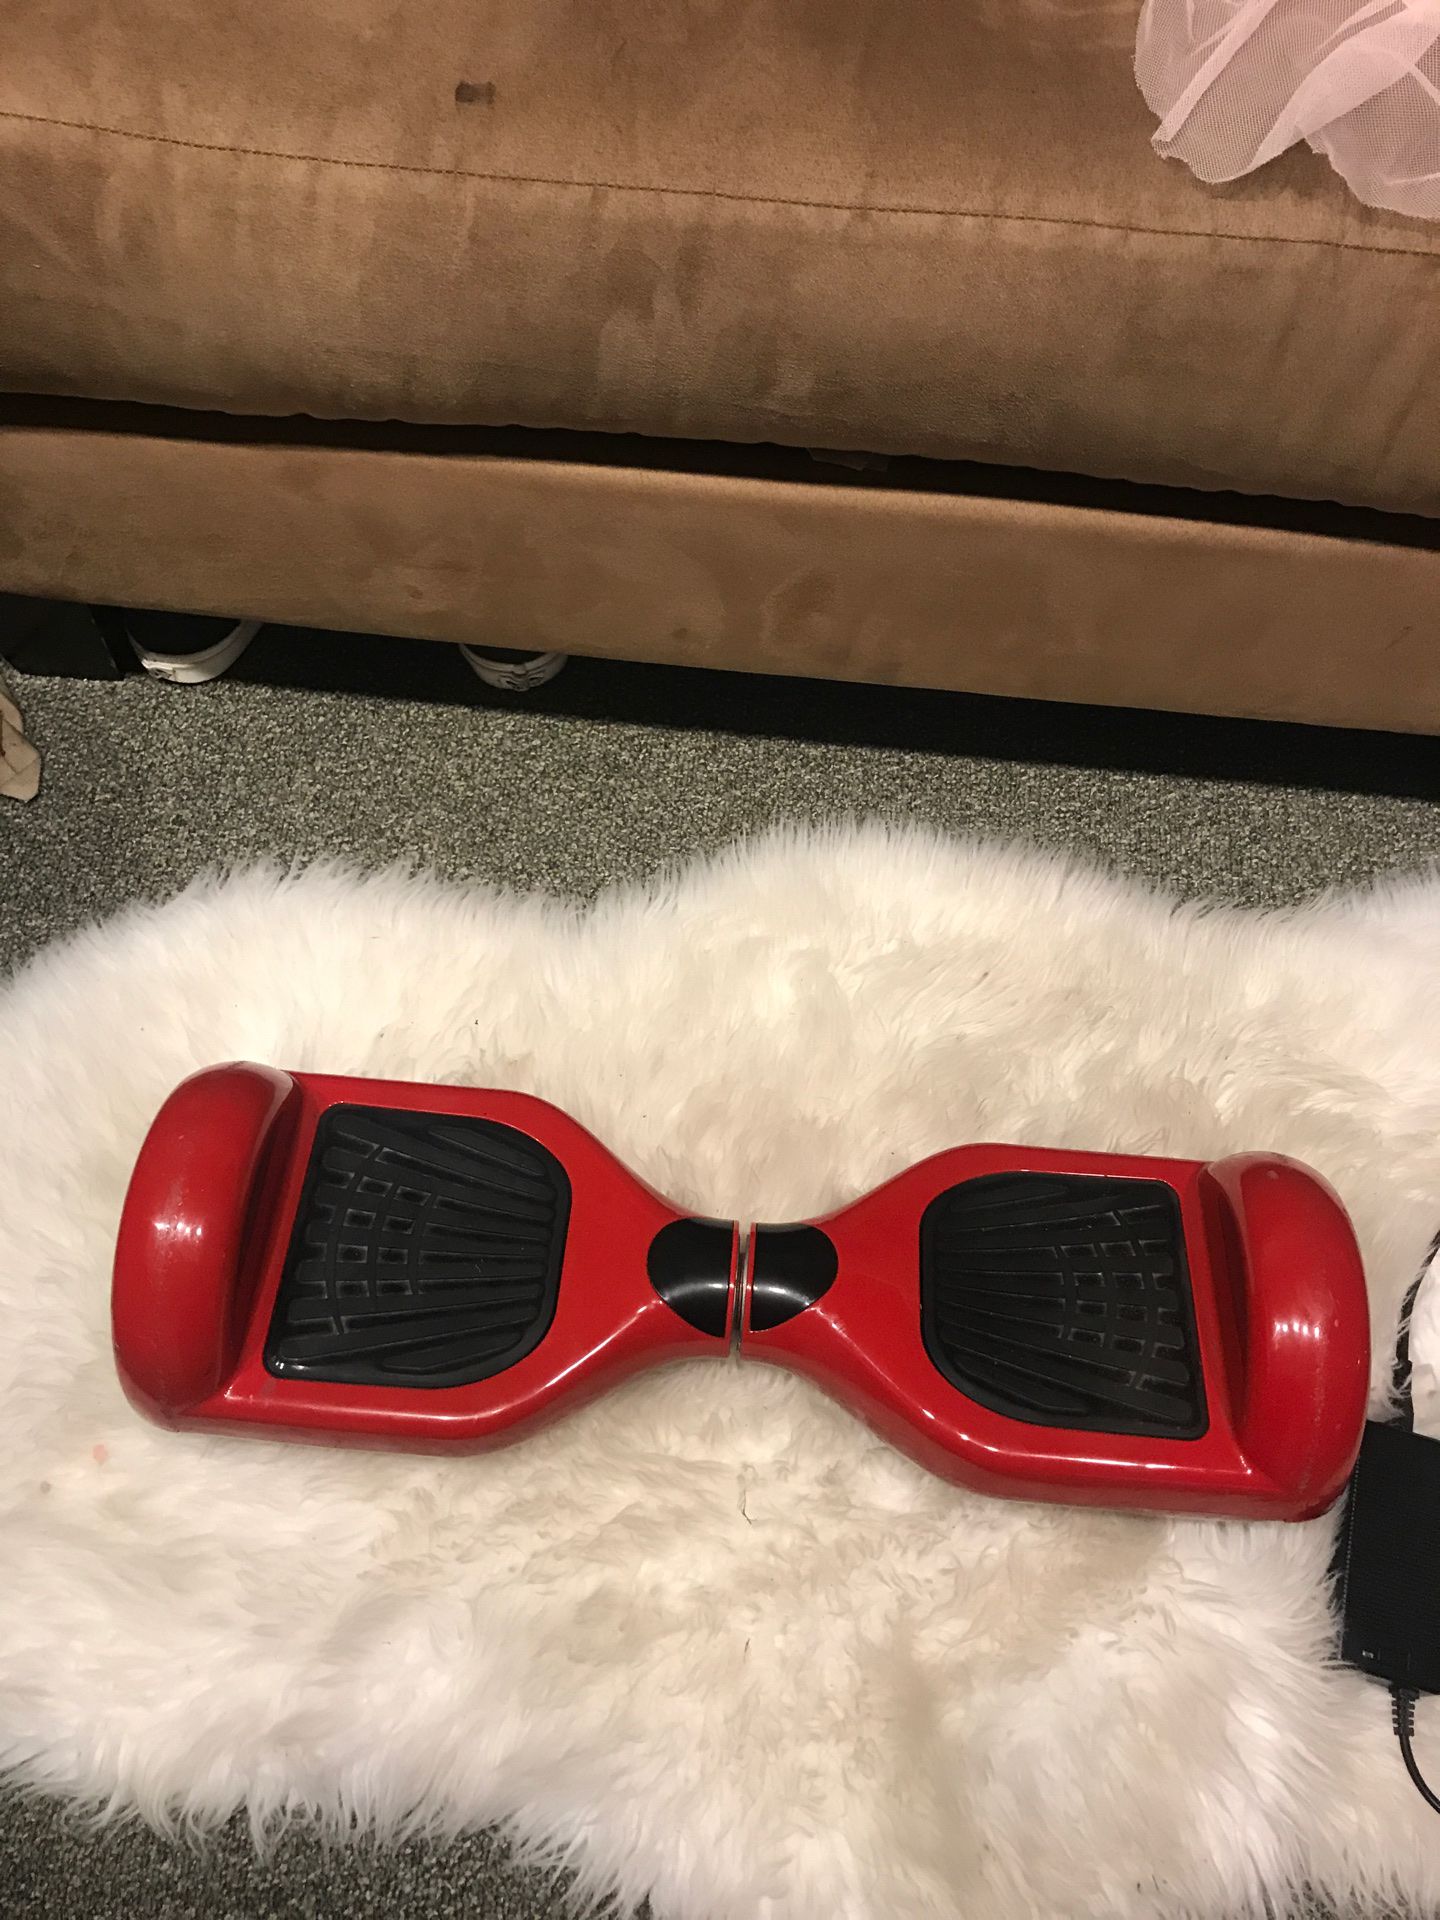 Hoverboard for sale